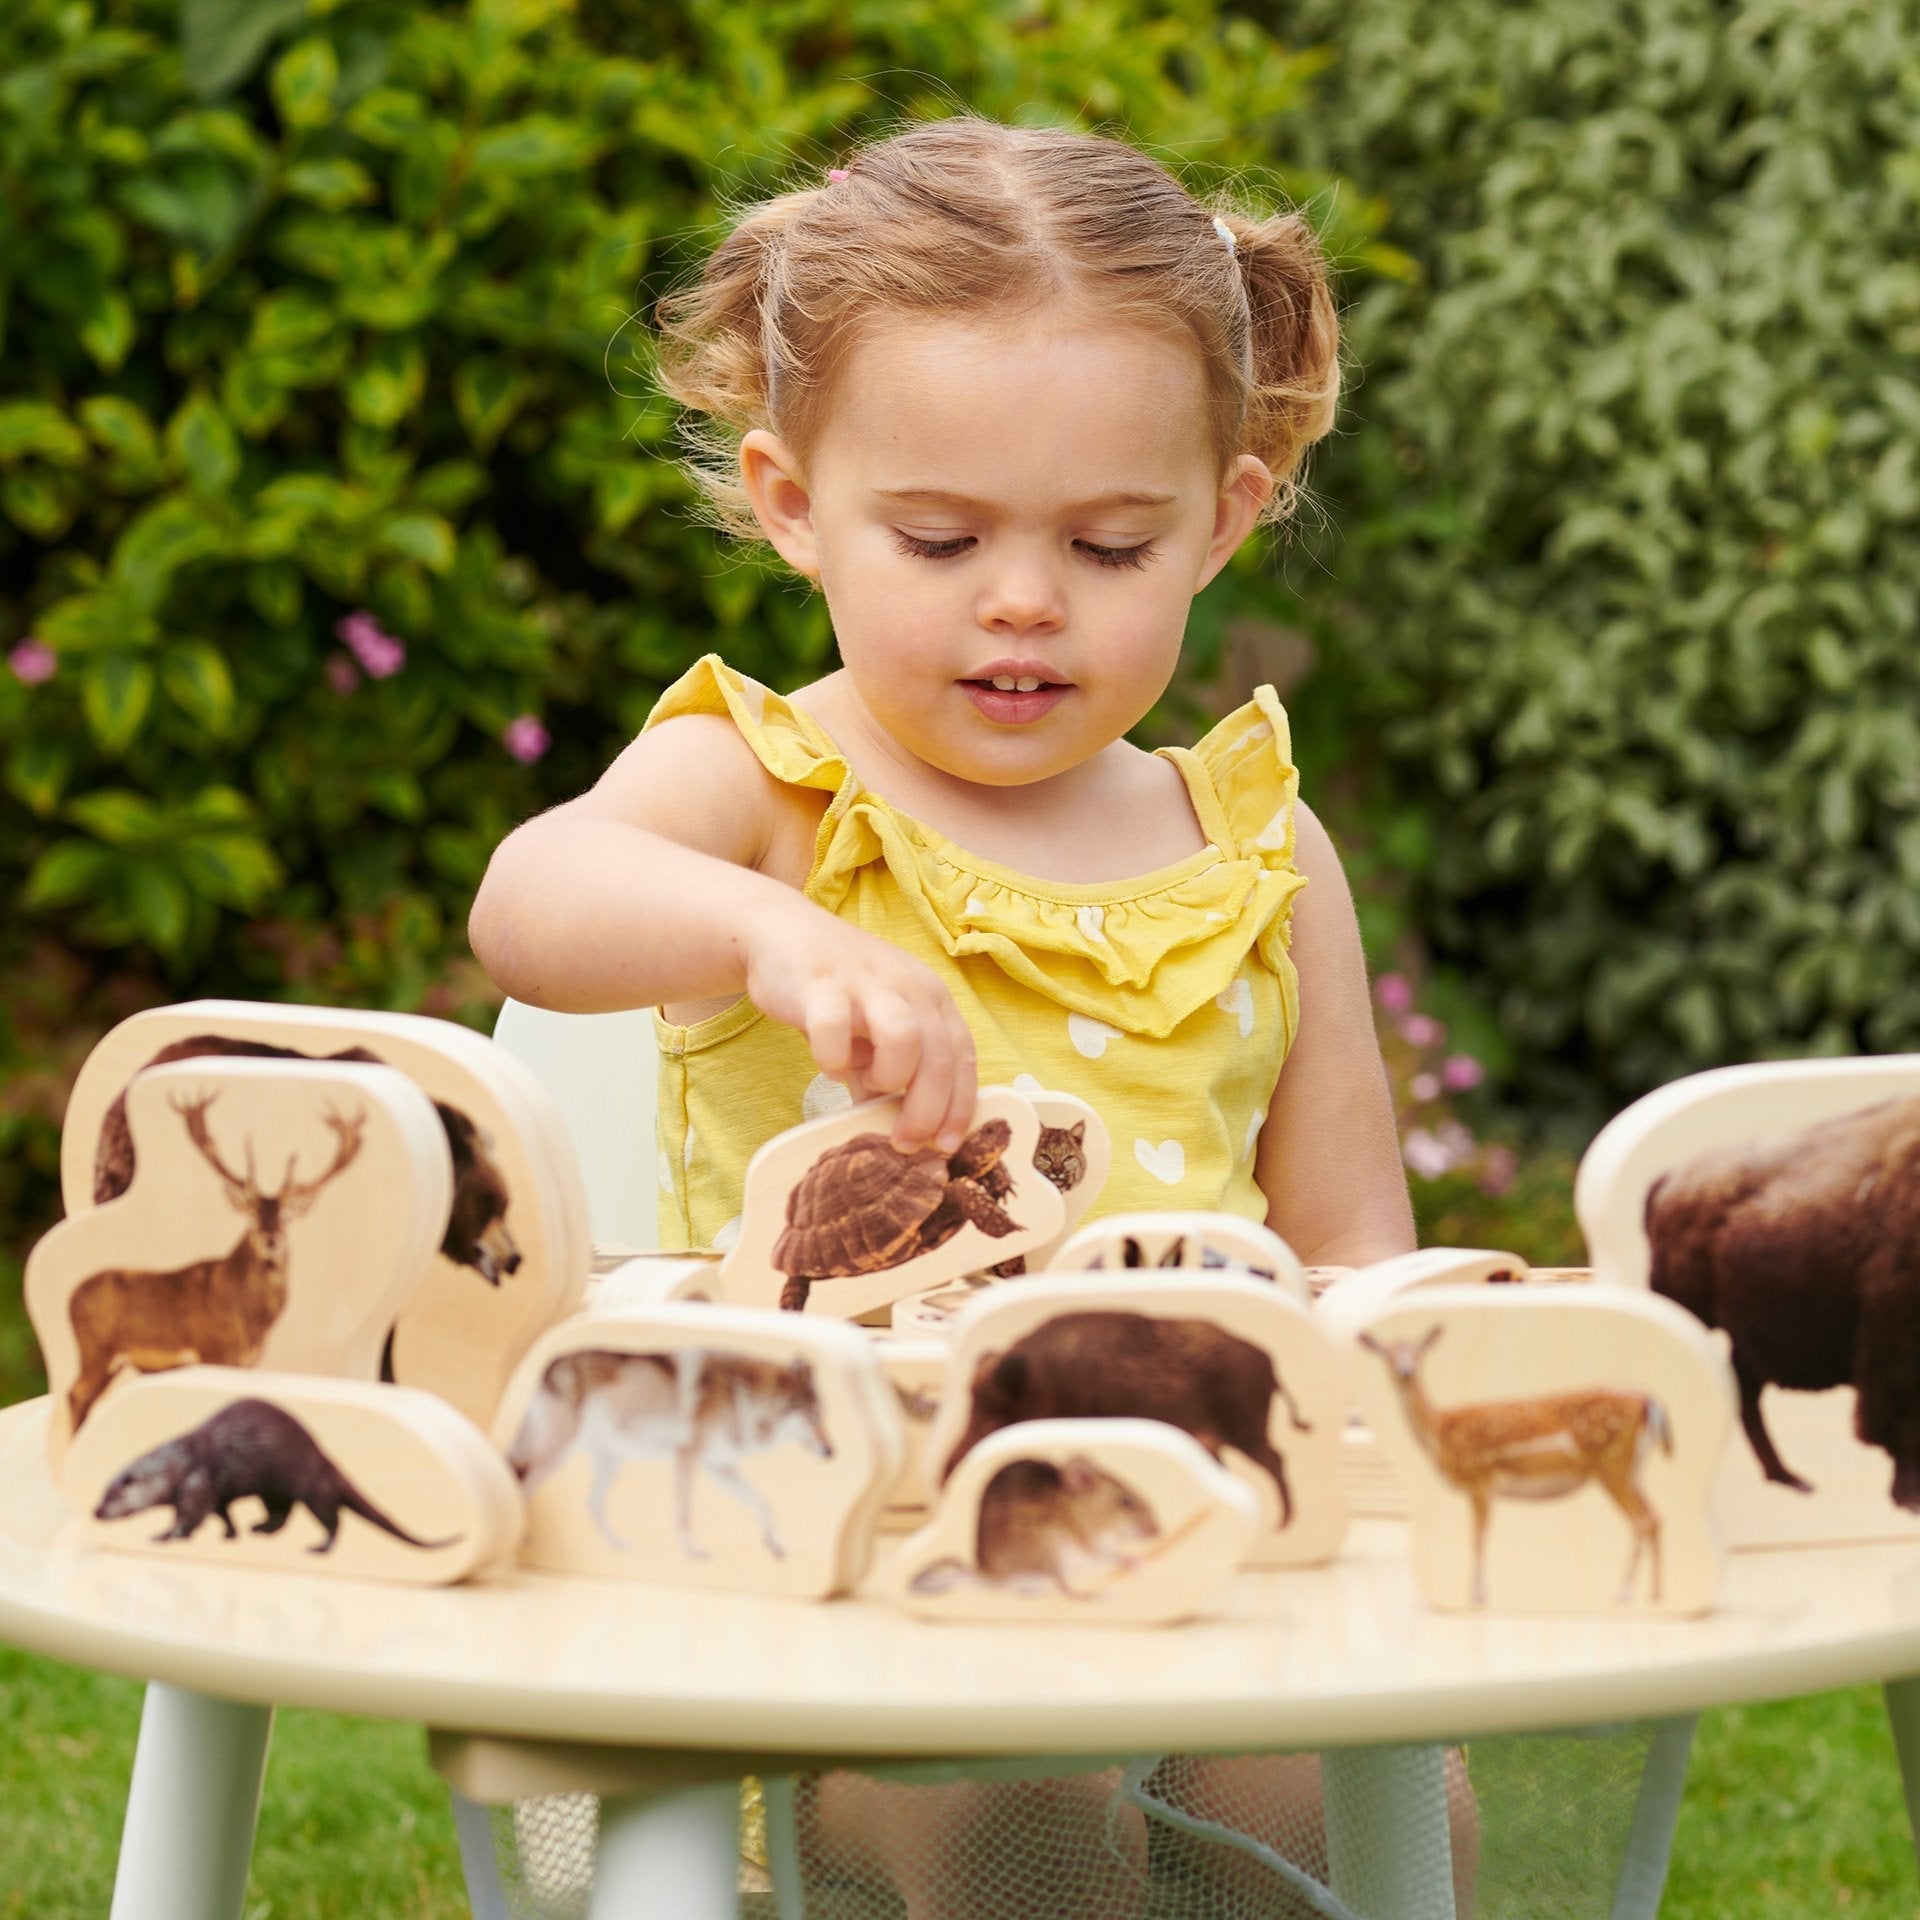 TickiT Wooden Forest Animal Blocks, Our TickiT® Wooden Forest Animal Blocks are a great way for your child to discover wild animals up close as the chunky wooden picture blocks are colour printed on both sides with real photographic images of wild animals from forest, river and woodland environments.The realistic imagery will enable your child to learn about animals in the wild and inspire them to identify them when out on trips to a safari park or see them in books. Older children can be encouraged to visu